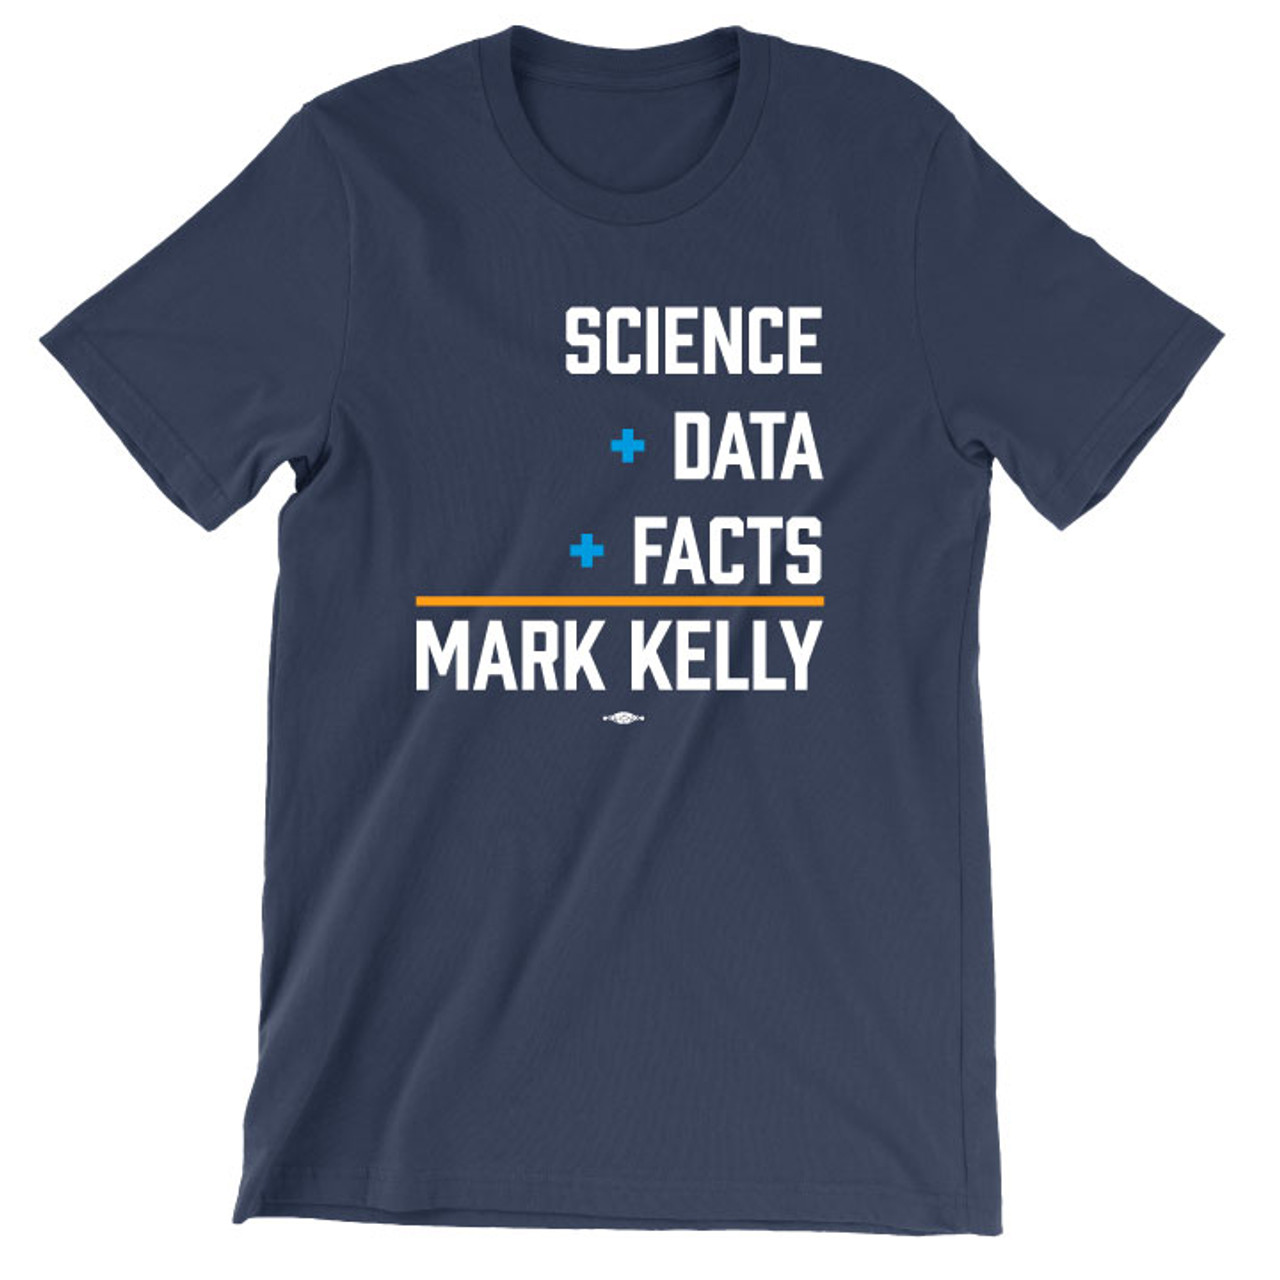 Science Data Facts Tee (Non-Fitted/ Fitted Navy Tee) - Mark Kelly for